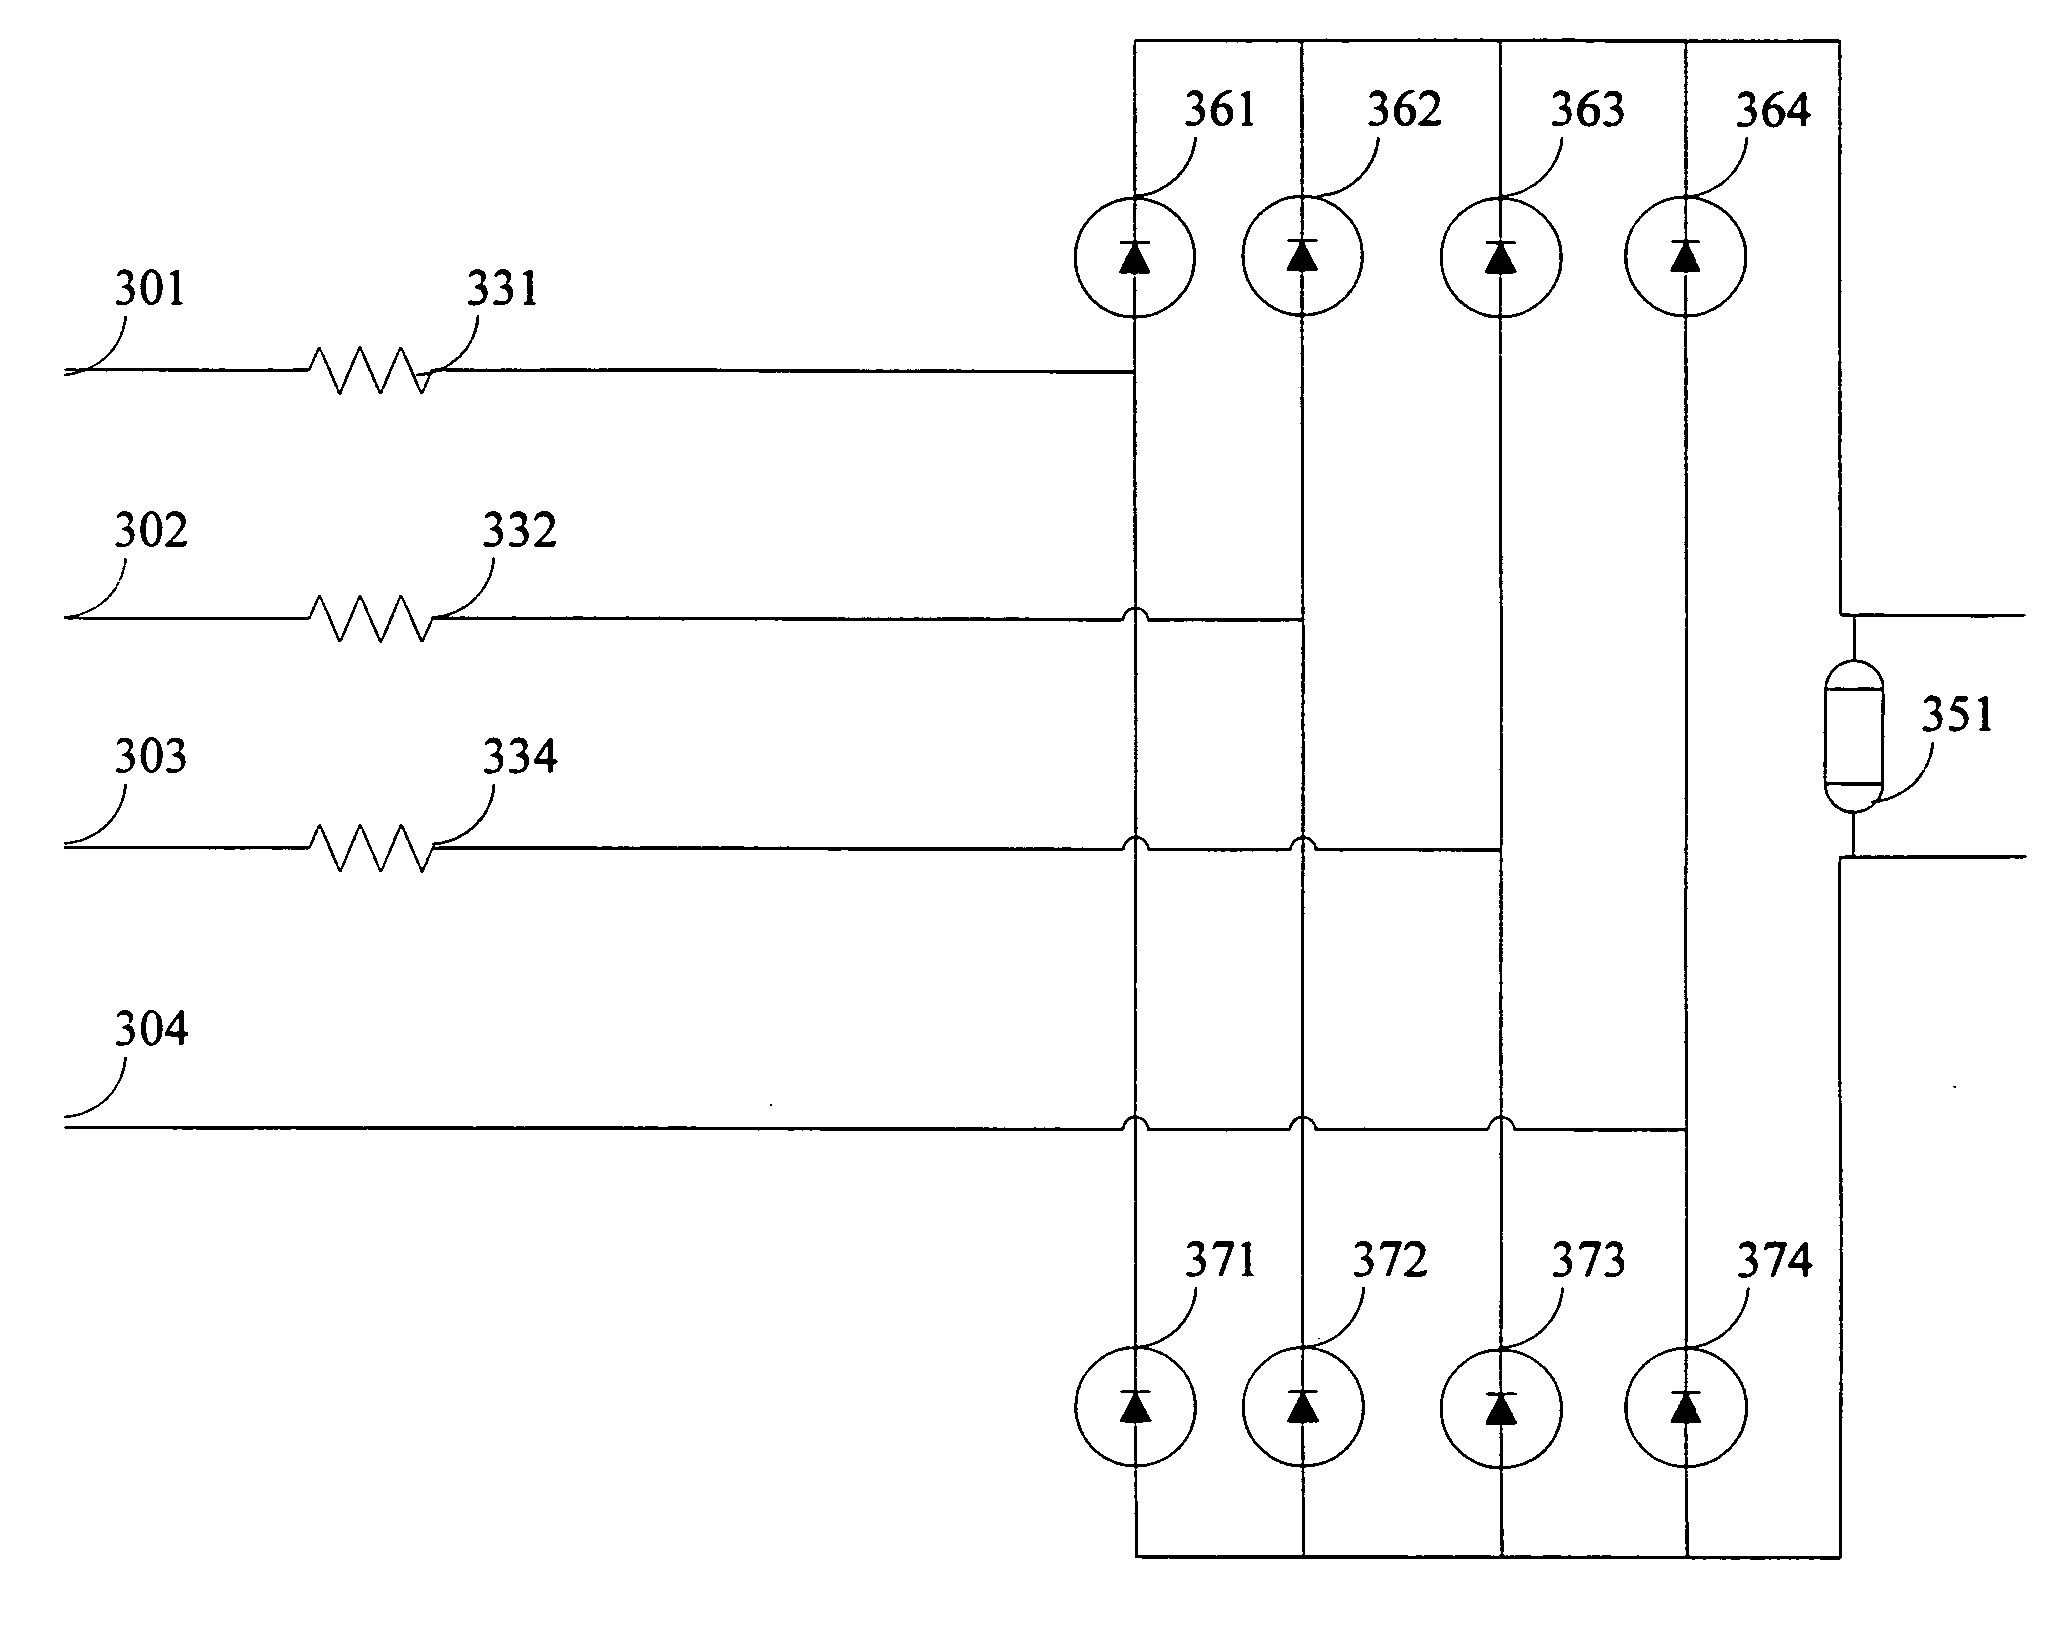 Transient protector circuit for multi-phase energized power supplies